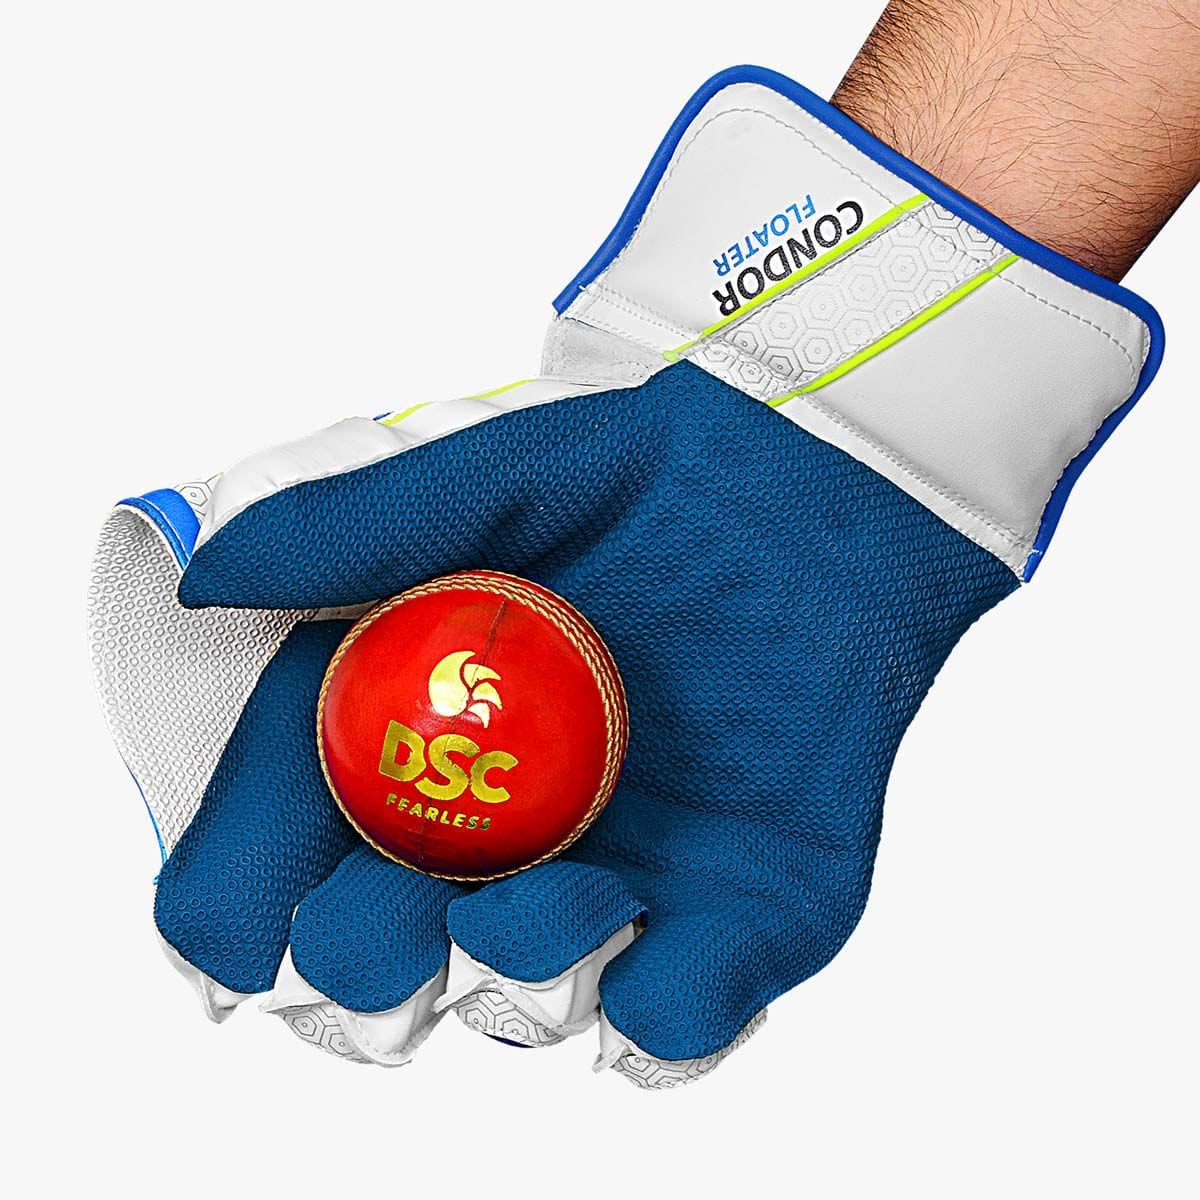 Adidas WicketKeeping DSC Floater Adult Cricket Wicketkeeping Gloves Adult